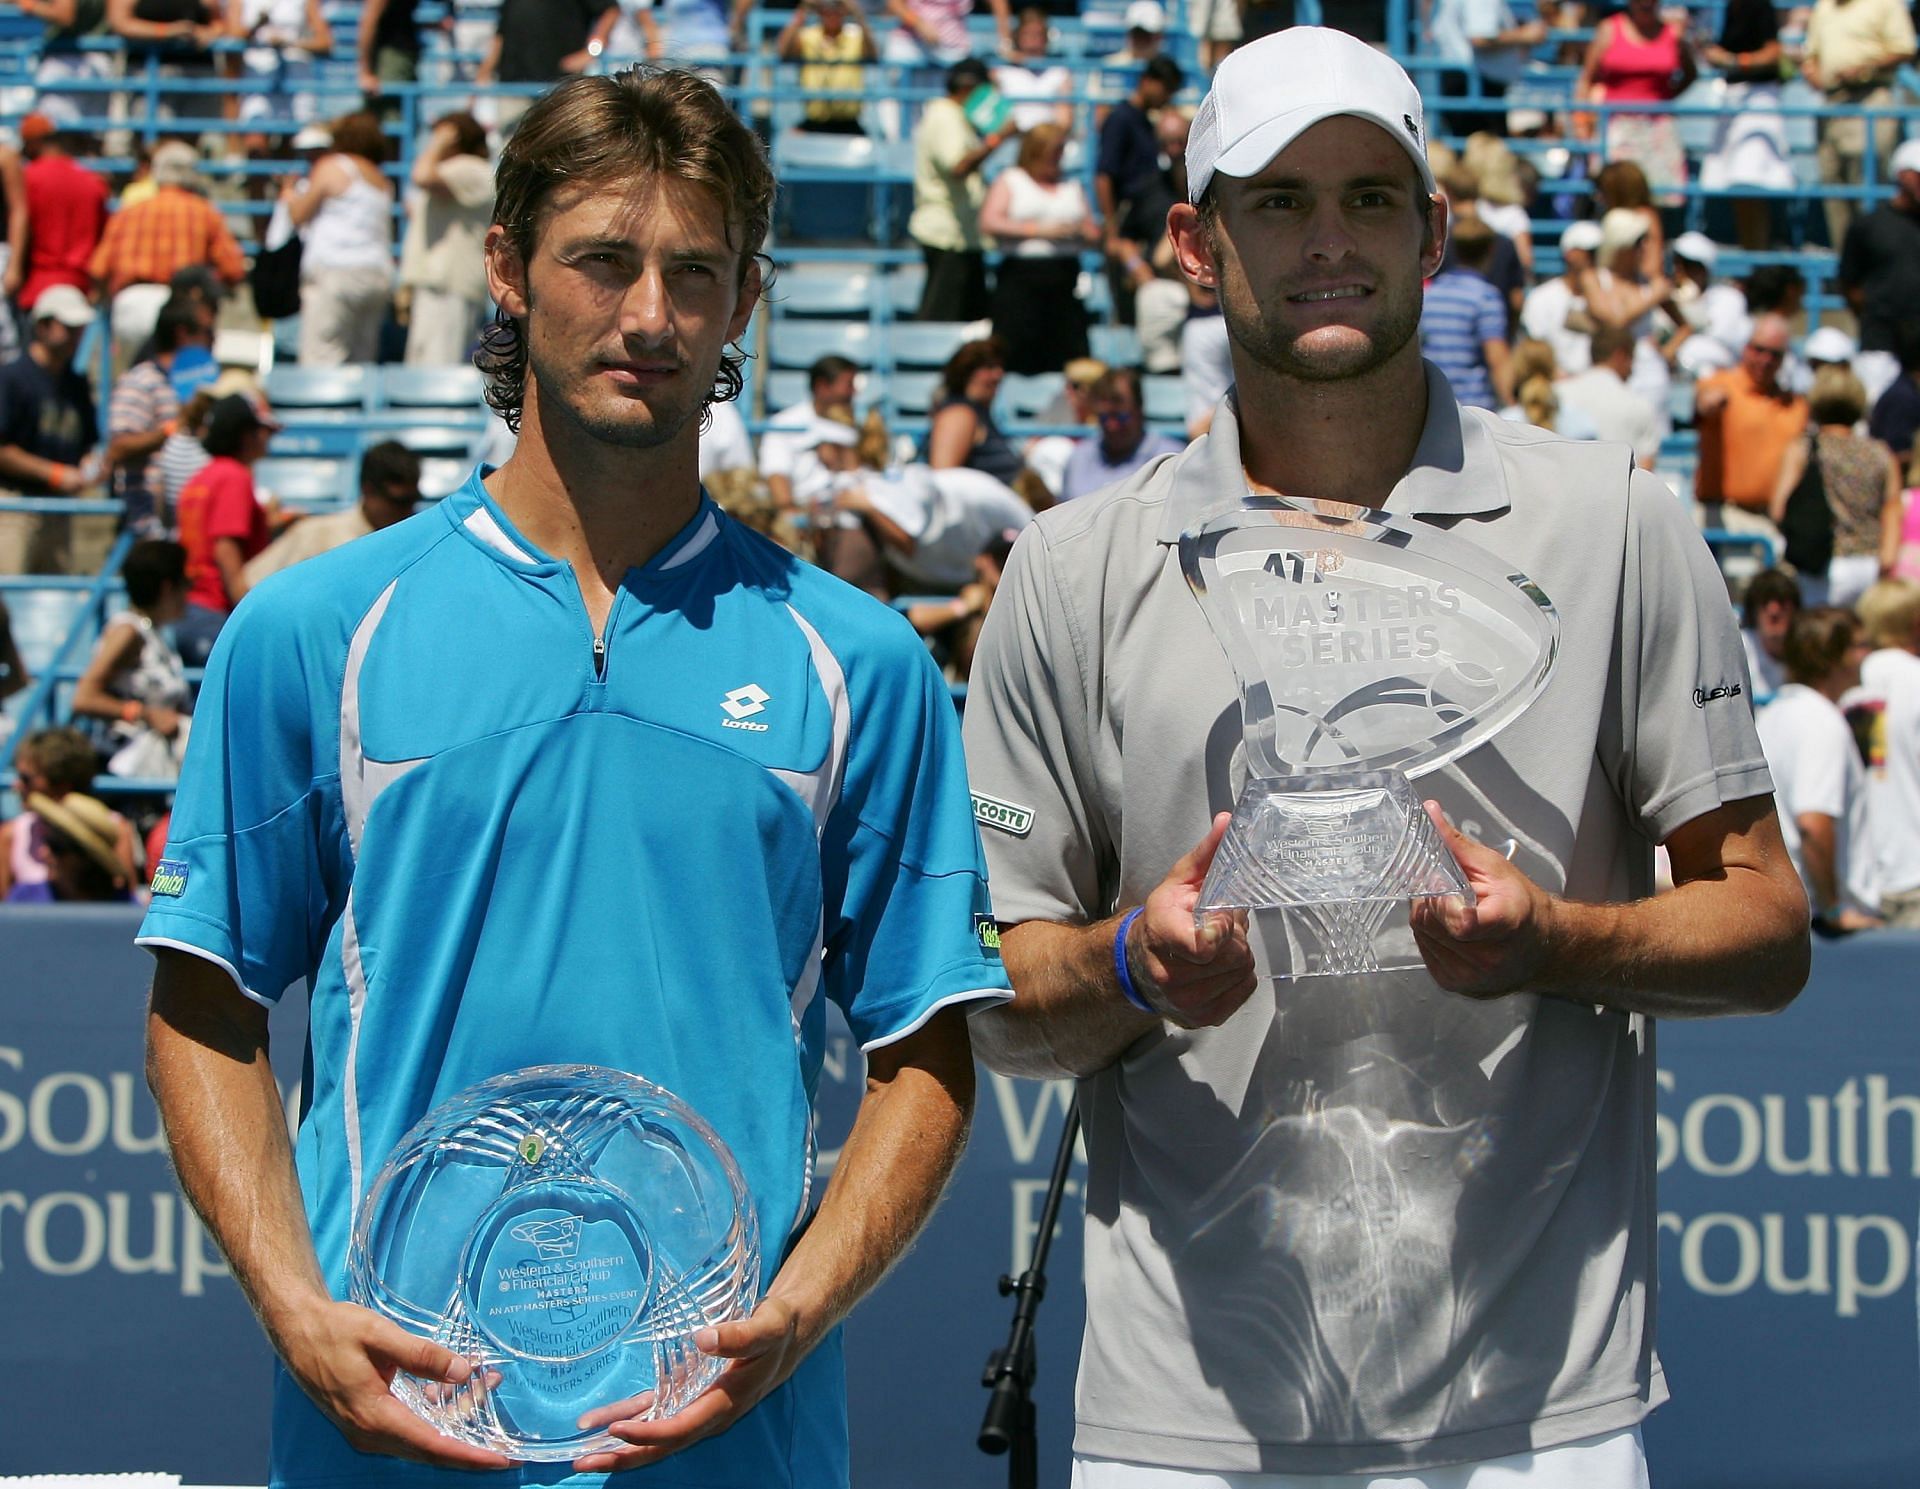 Fritz became the first American man to win a Masters 1000 singles title since Andy Roddick in 2006